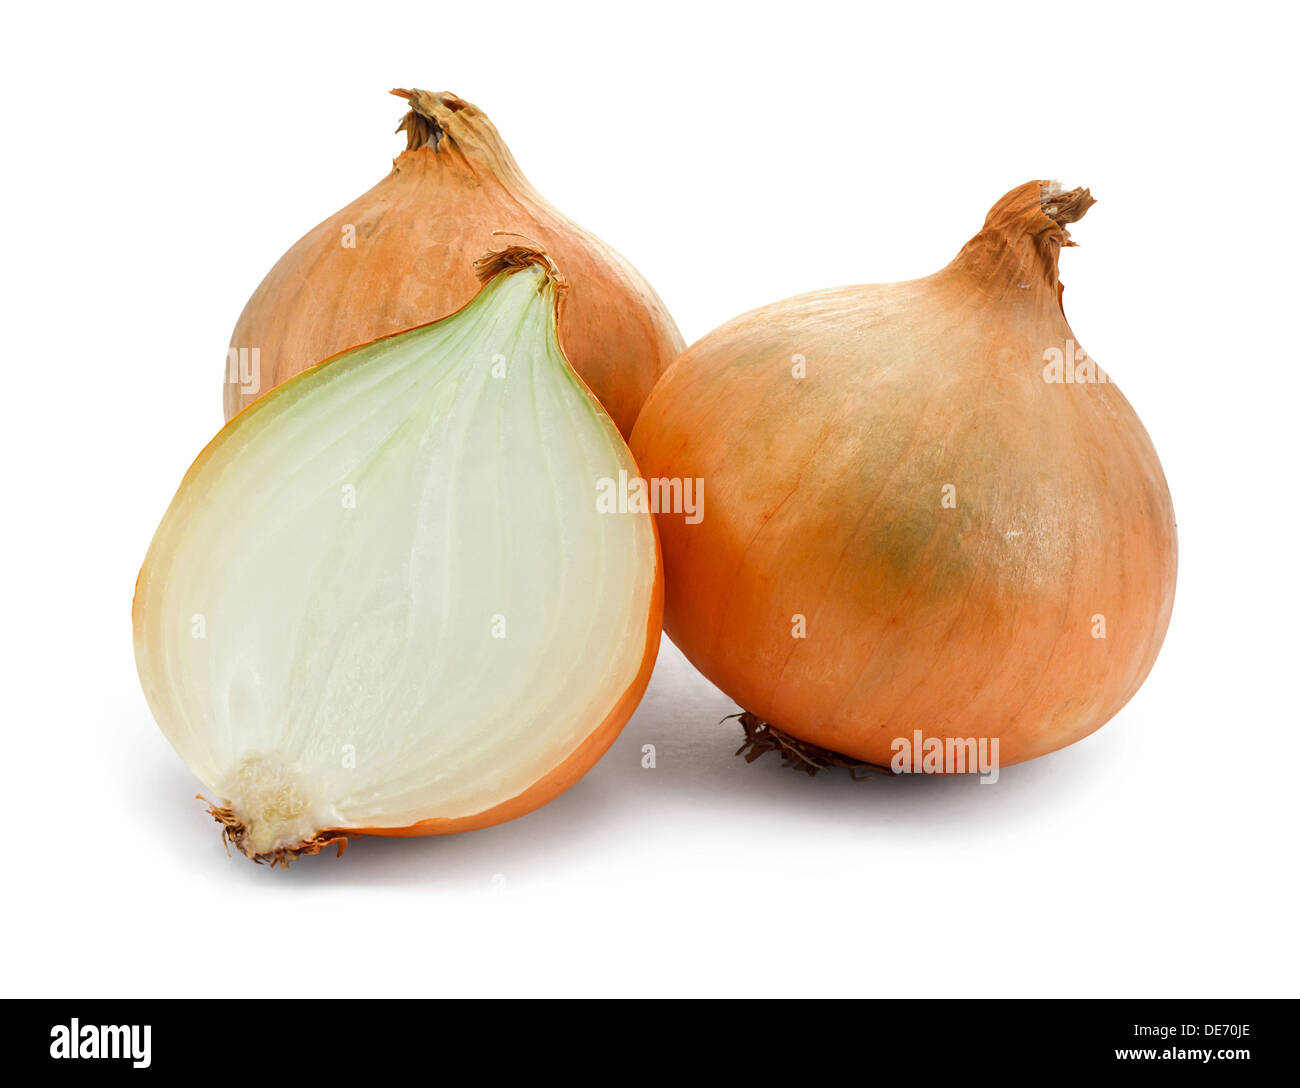 fresh onions on a white background a common vegetable Stock Photo